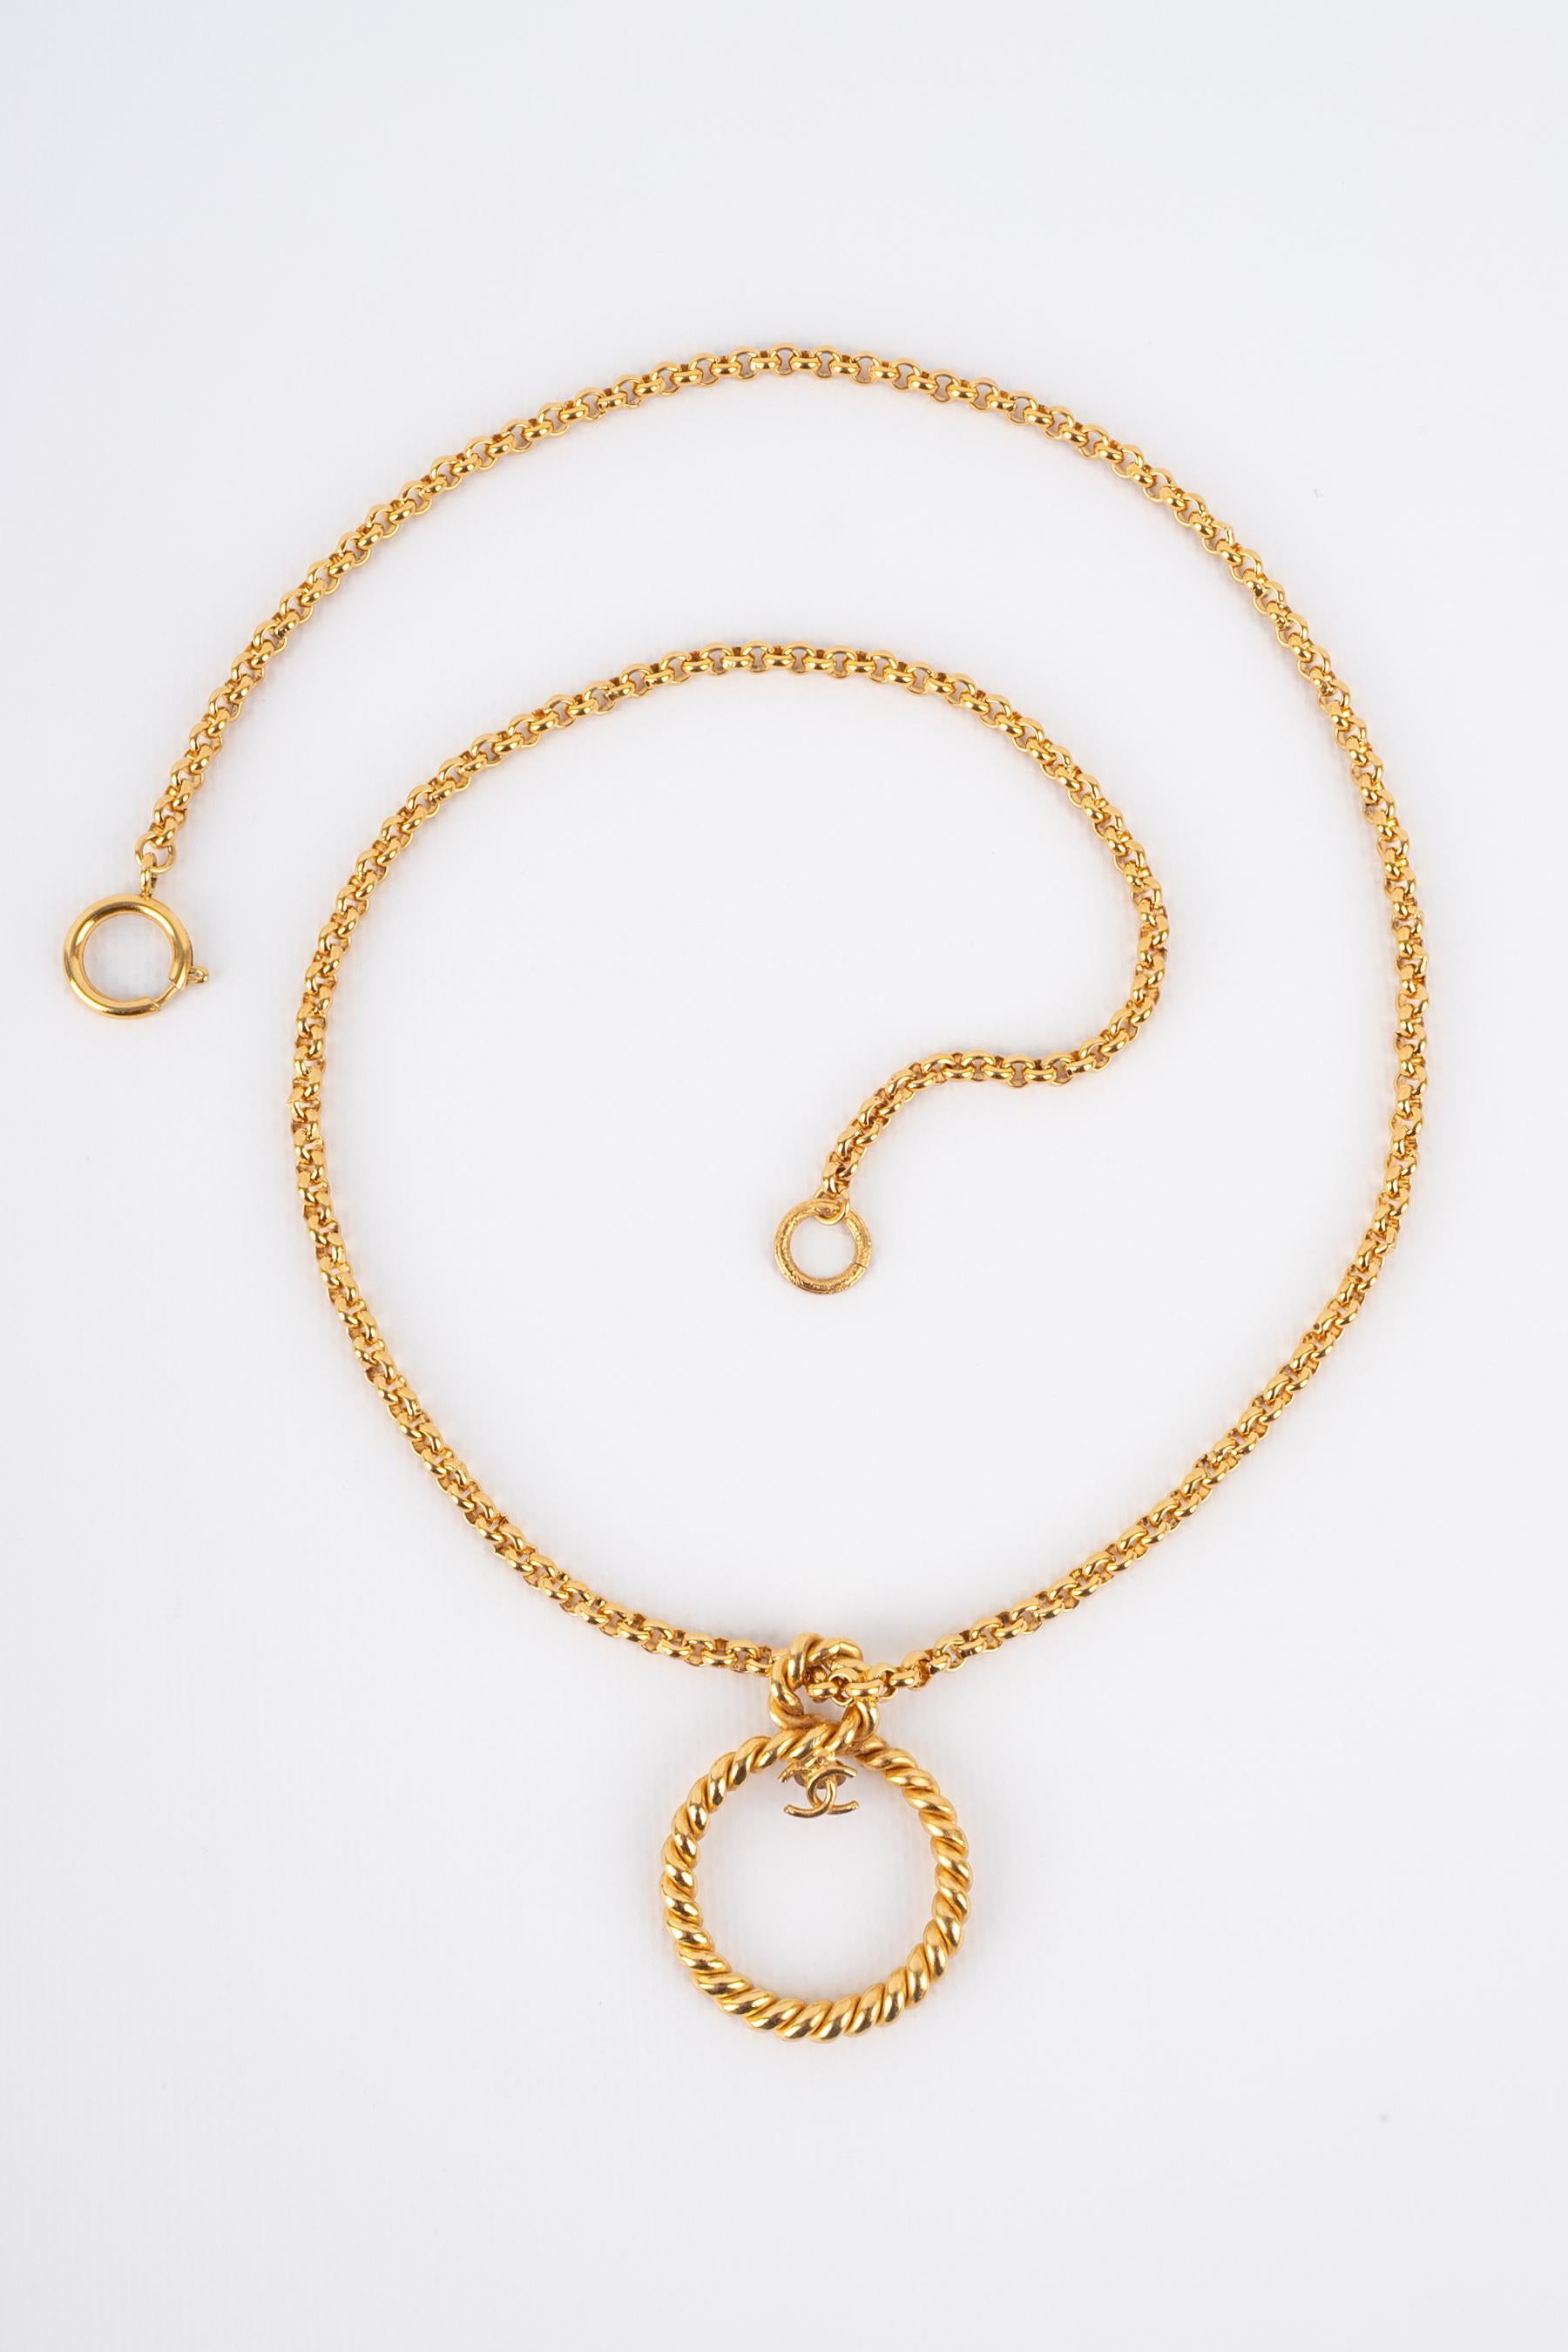 CHANEL - (Made in France) Golden metal pendant necklace. 1995 Fall-Winter Collection.

Condition:
Very good condition

Dimensions:
Length: 80 cm

CB272